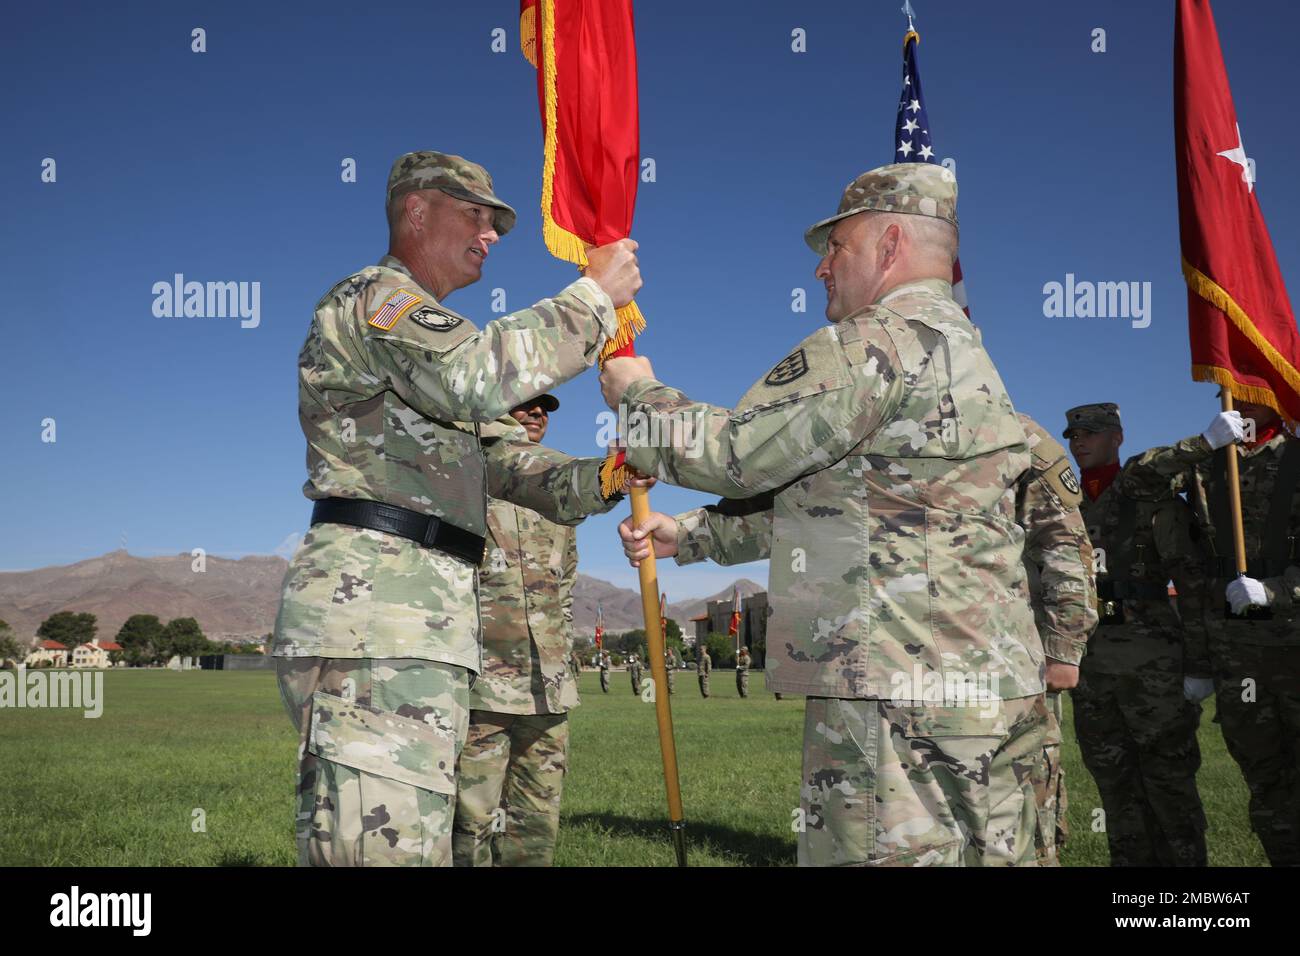 Command Sgt. Maj. Jerry Jacobitz passes the 32d Army Air and Missile Defense Command colors to Brig. Gen. David Stewart, commander, 32d AAMDC during a change of responsibility ceremony held June 23, at Noel Field, Fort Bliss, Texas where Jacobitz relinquished responsibility of the unit to Command Sgt. Maj. Raymond Belk. Jacobitz, who joined the Army in 1992 as an infantryman, and who later in 1997 reclassified to become a Patriot Launcher Advance Operator/Maintainer will be also retire after over 30 years of service. Stock Photo